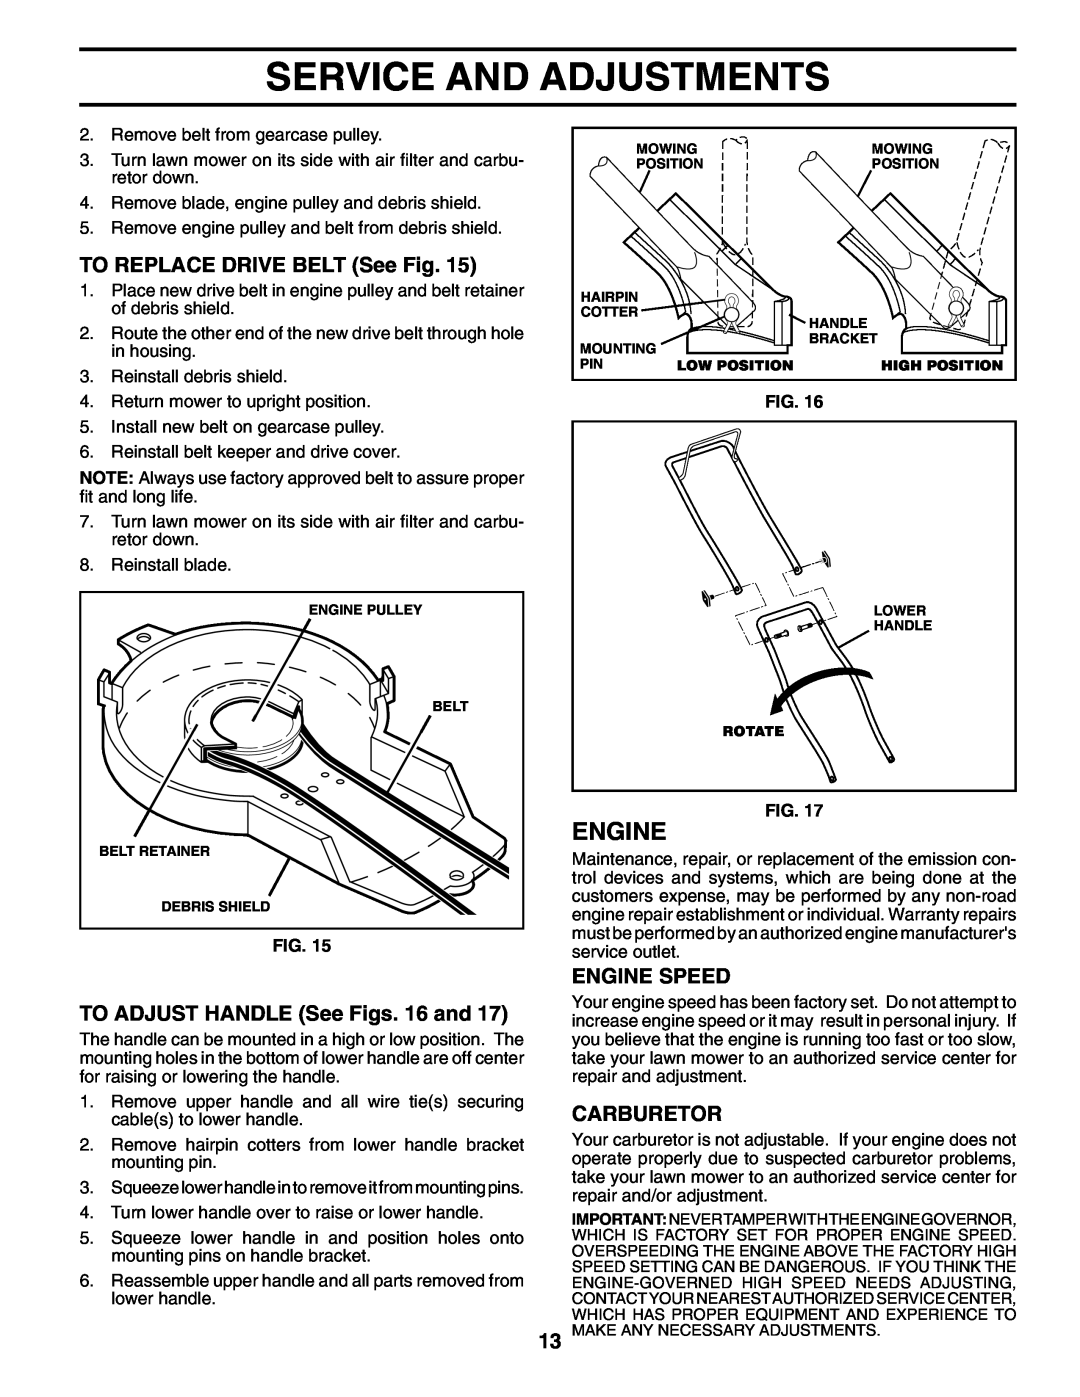 Husqvarna 5521 CHV 96143000106 manual TO REPLACE DRIVE BELT See Fig, TO ADJUST HANDLE See Figs. 16 and, Carburetor, Engine 